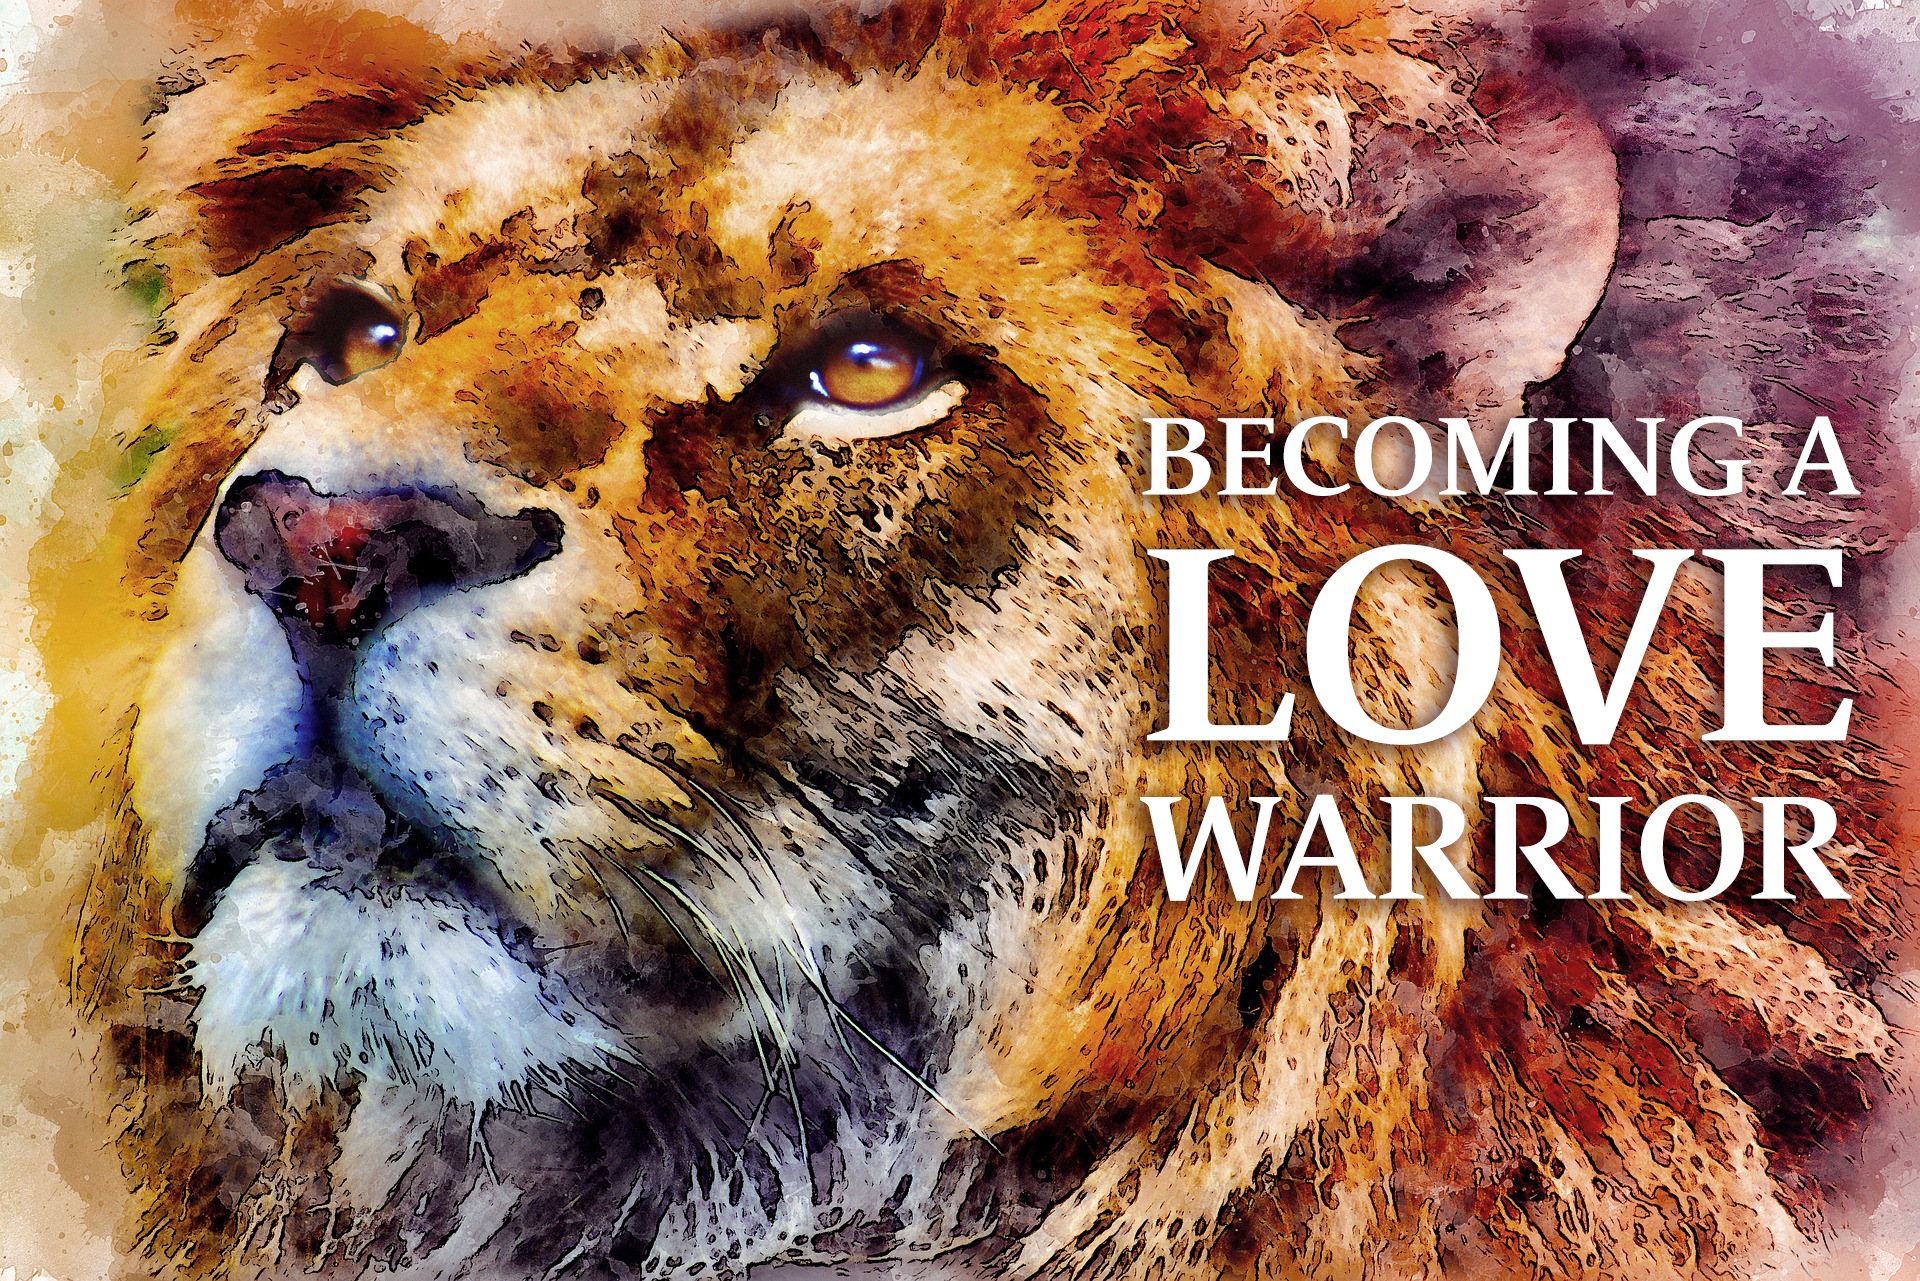 Becoming a Love Warrior Lesson II: Becoming a Love Warrior Takes a Firm Foundation. A Jungian perspective on the meaning of love in these challenging times.